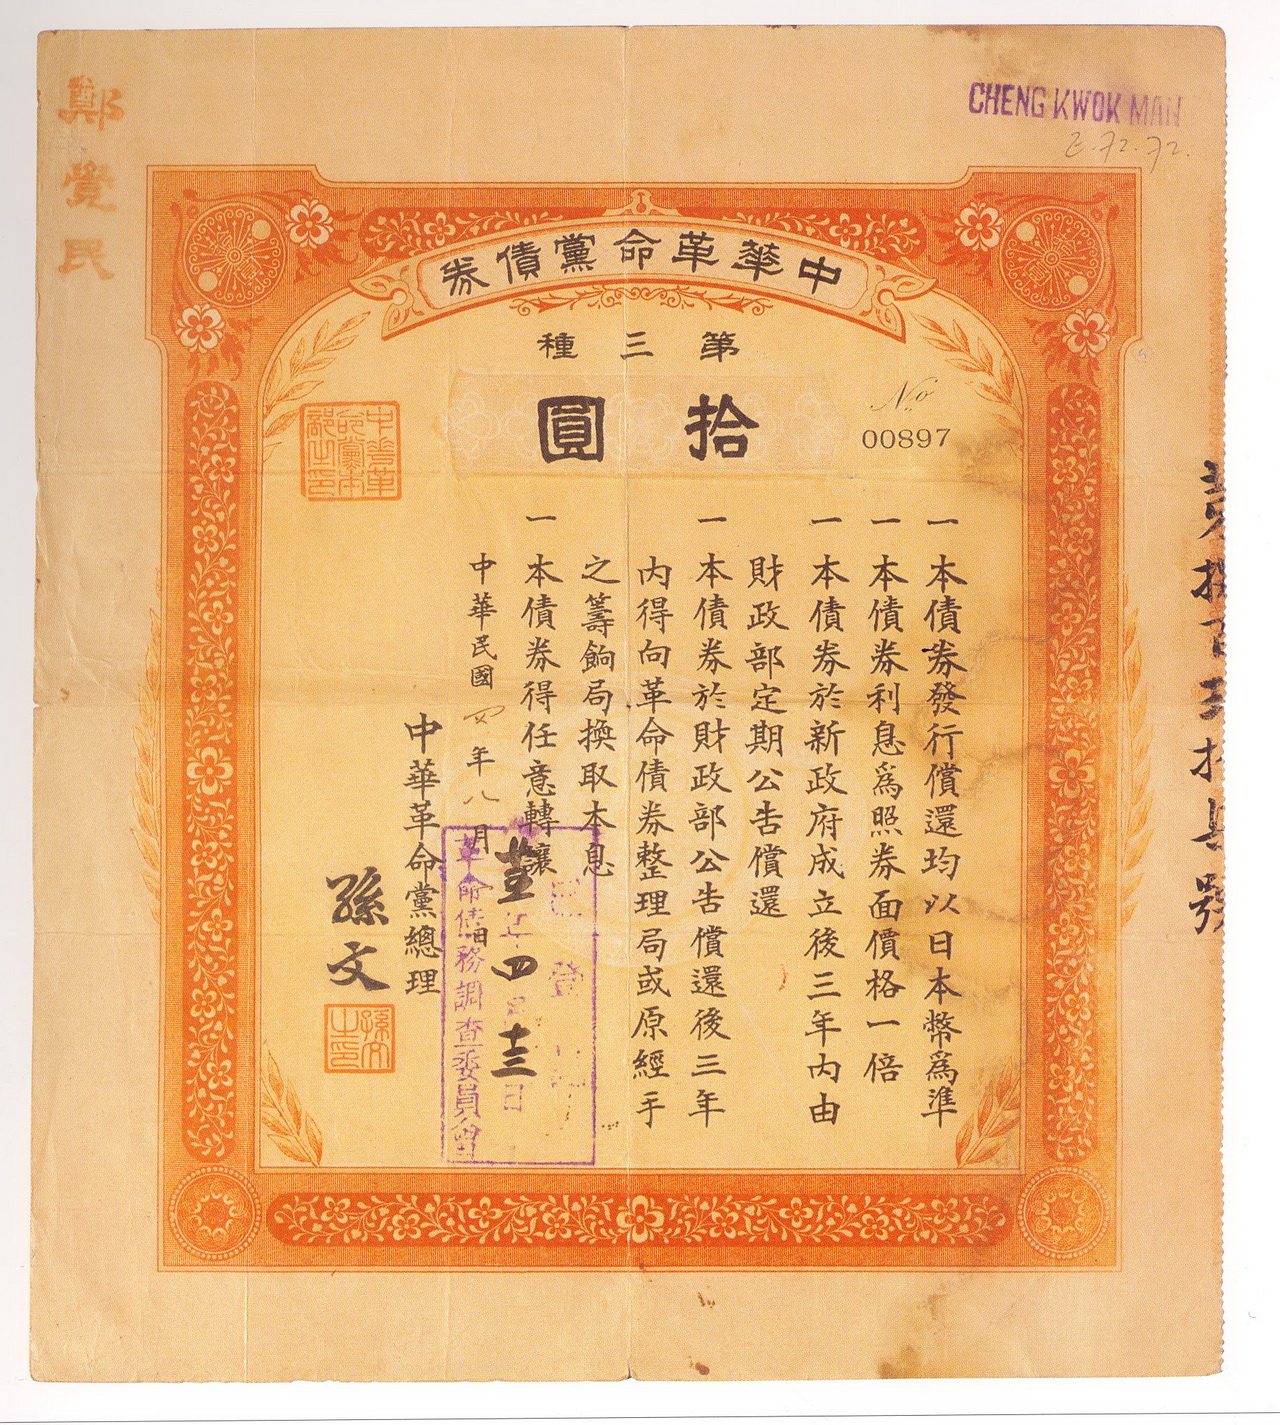 Ten-dollar bond of the Chinese Revolutionary Party, 1914. Donated by Mr Hung Hin Chung